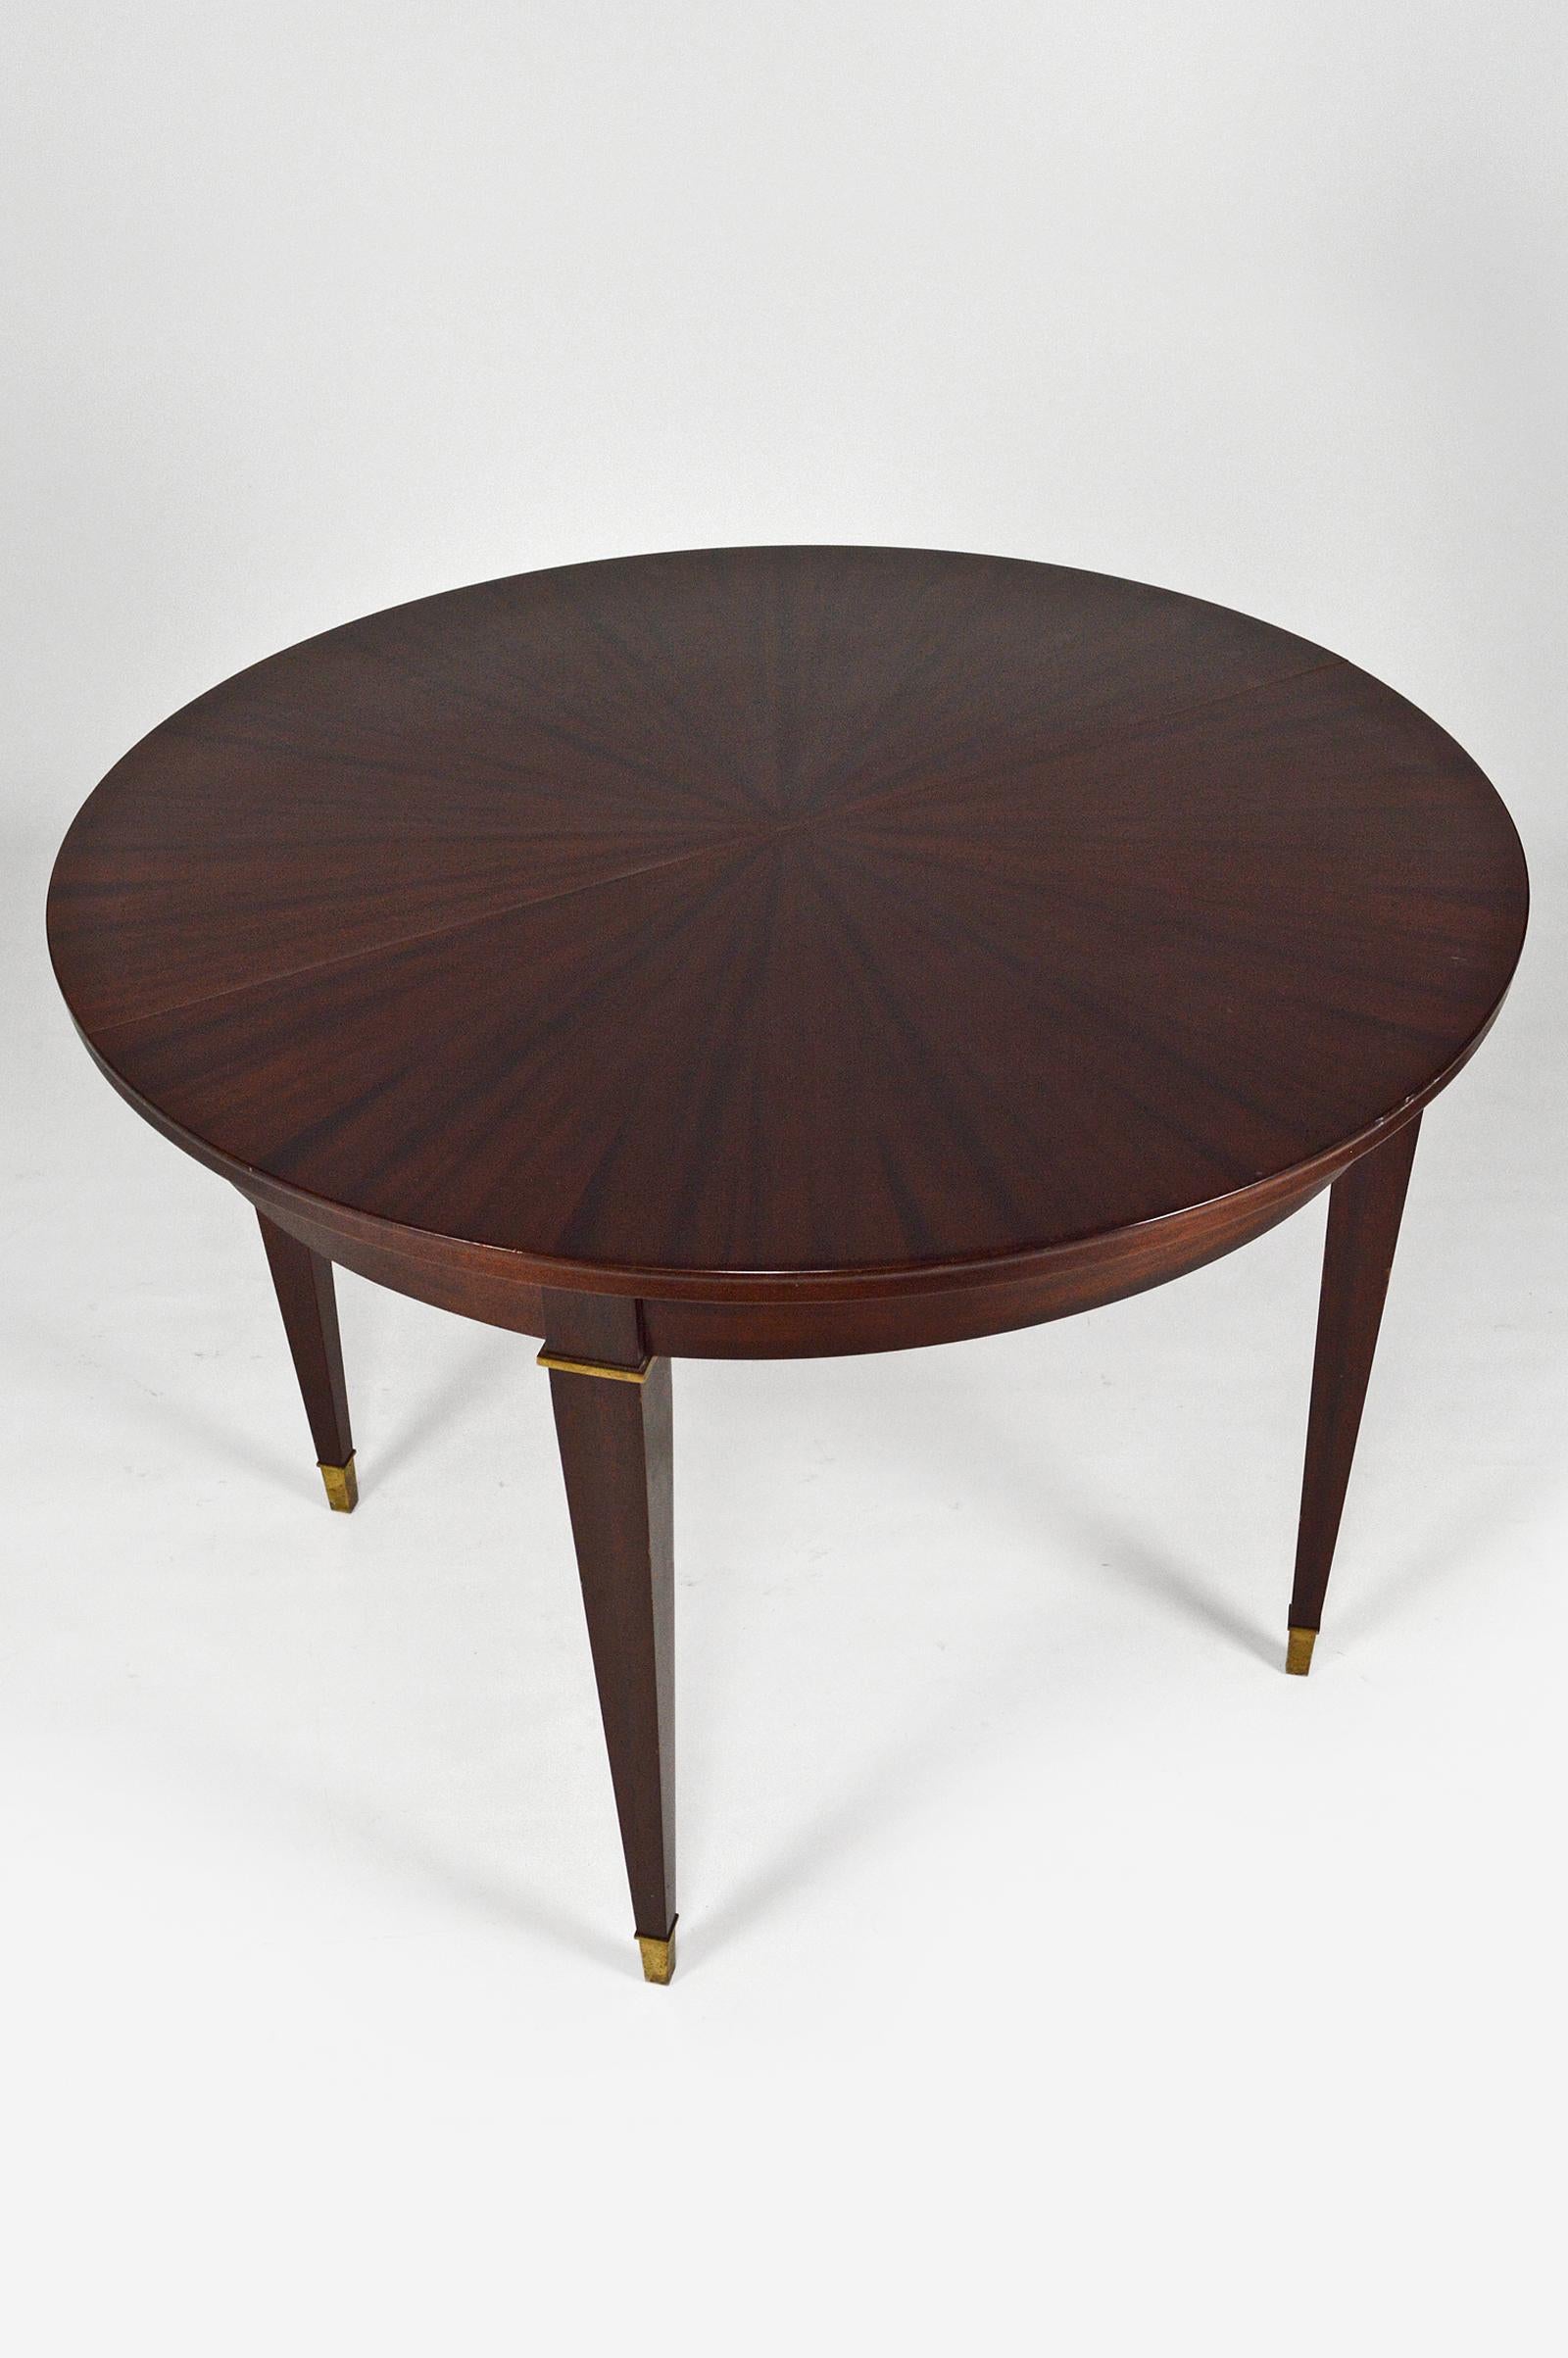 Art Deco Mahogany Round Table with Extensions, by Jacques Adnet, circa 1940 For Sale 1